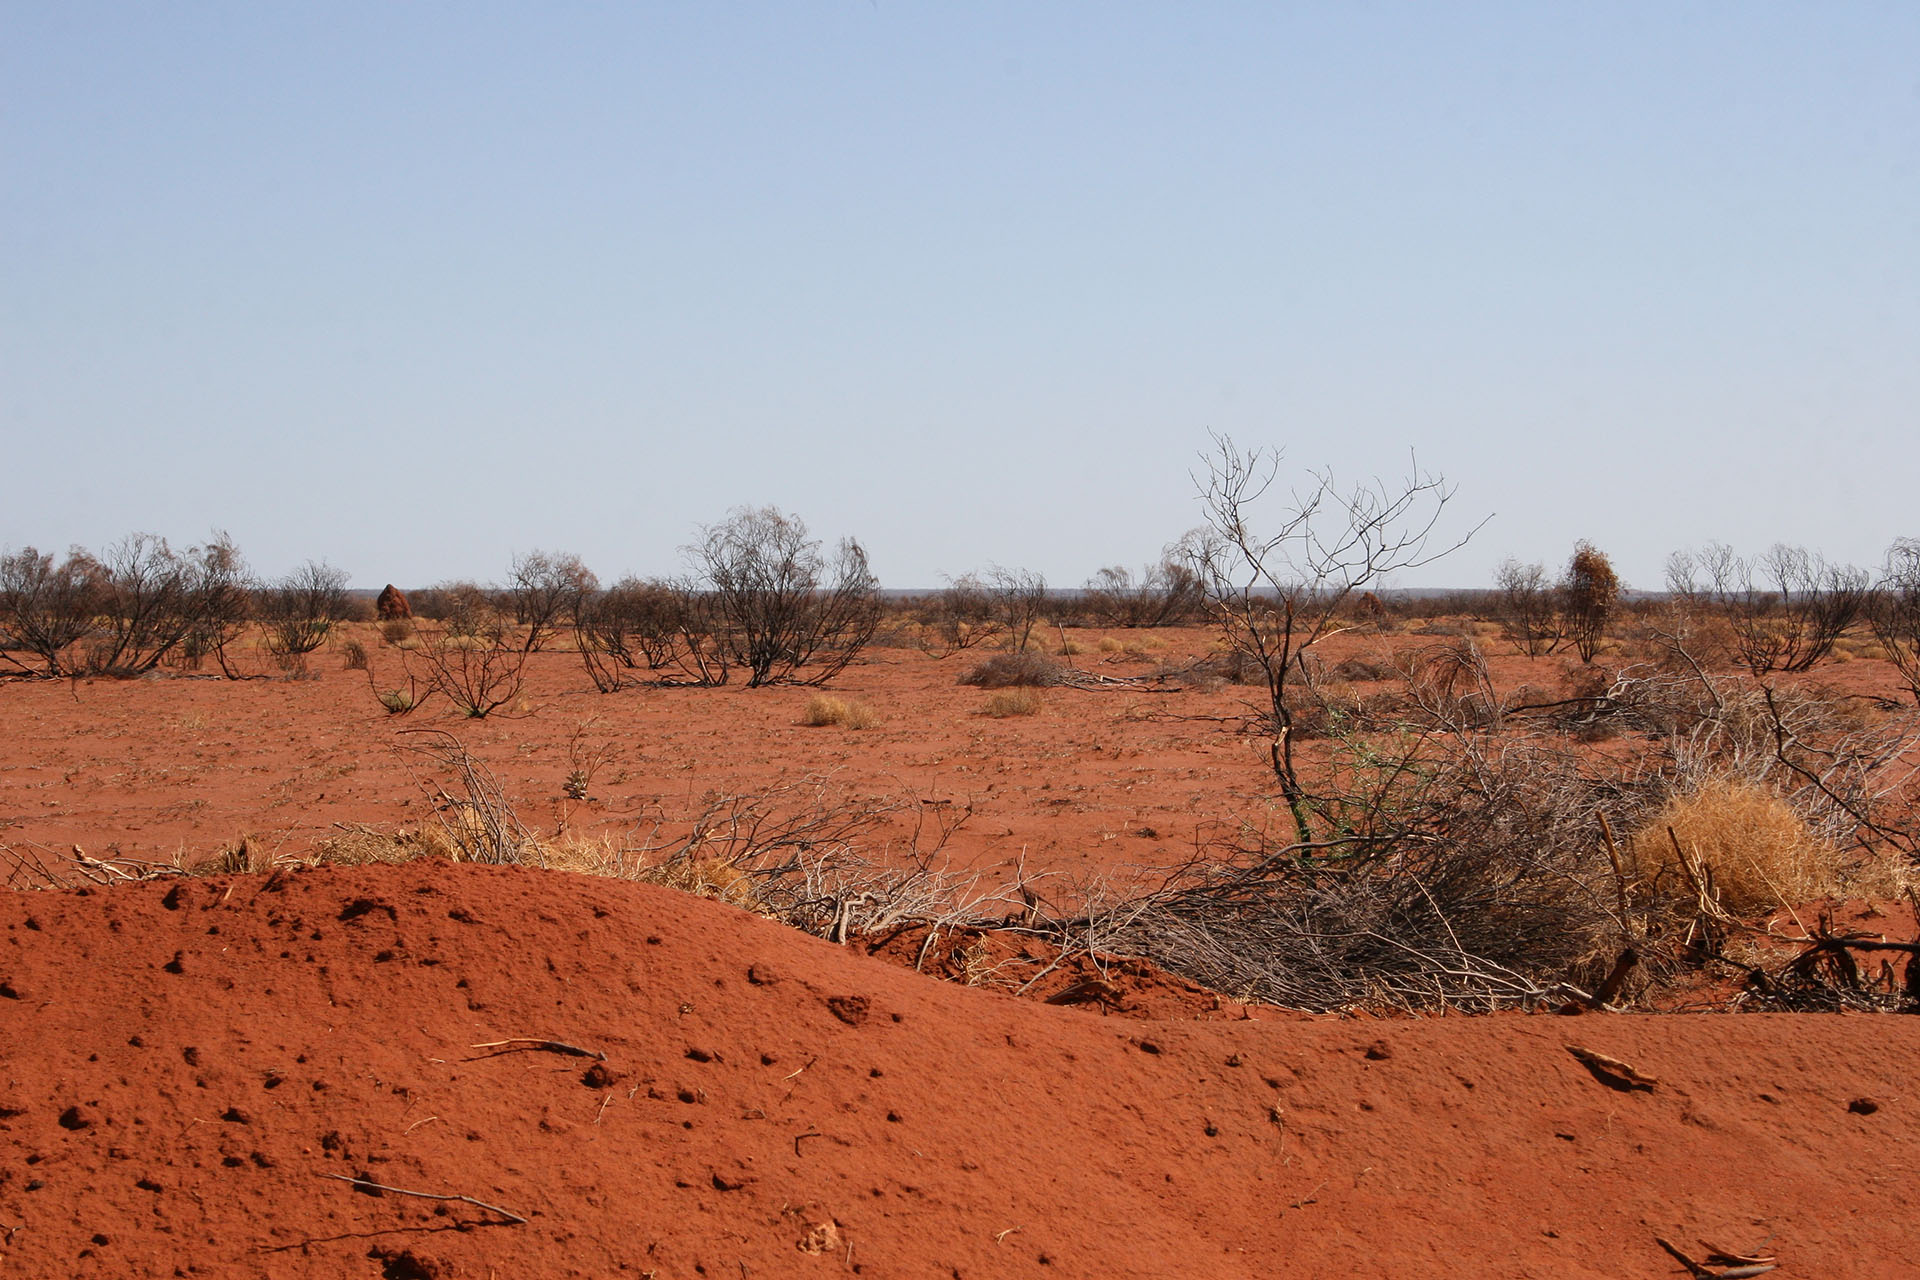 Red desert and termite mounds far ahead.